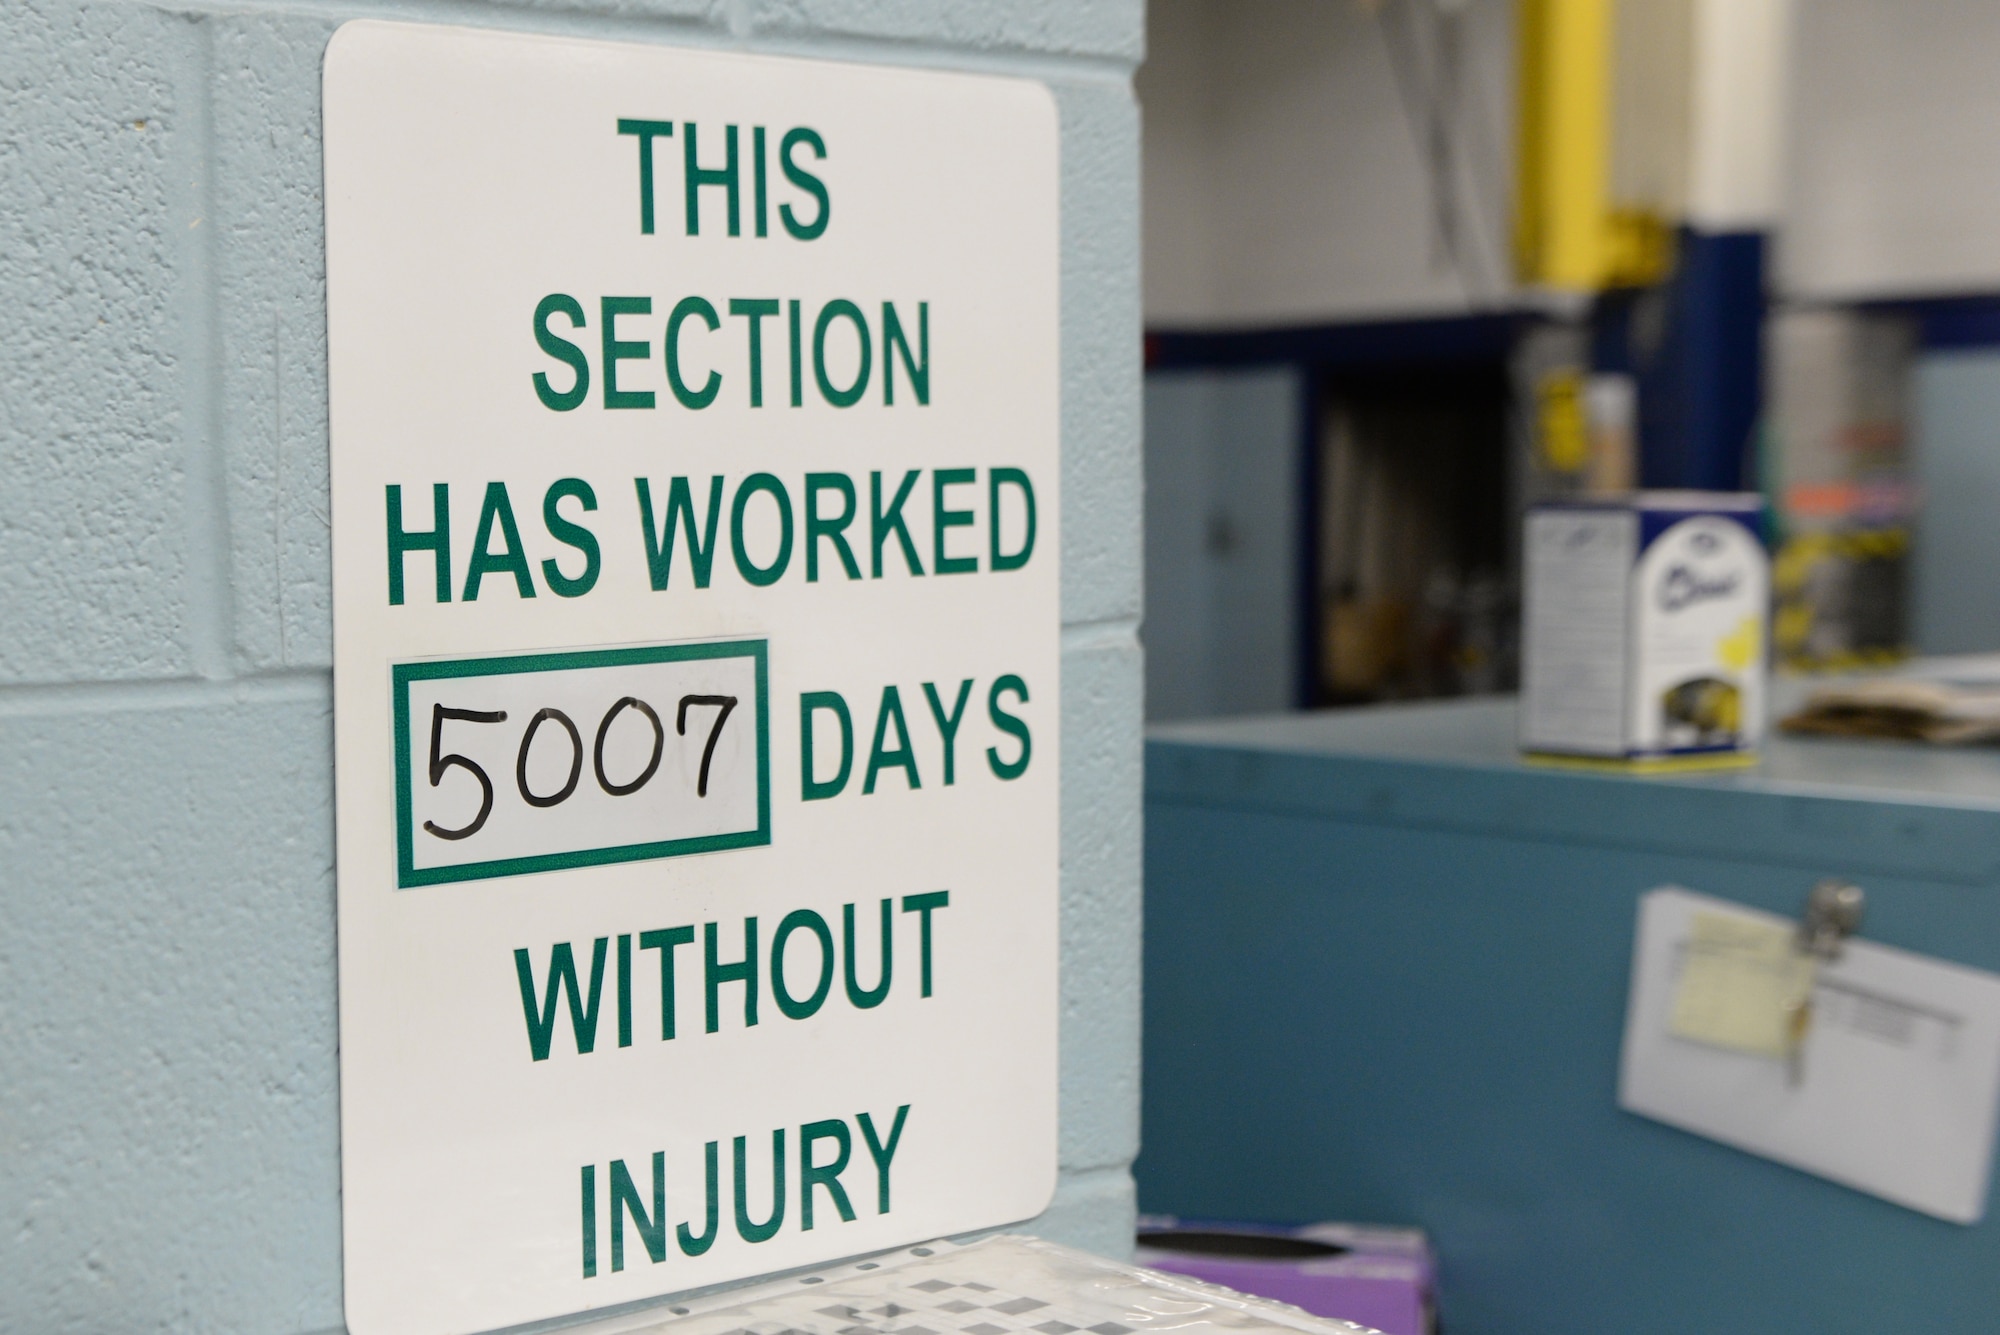 The sign displaying over 5,000 days of safety stands on display in the hydraulic shop February 27, 2018, on Altus Air Force Base, Okla. The hydraulic shop recently reached 5,000 days with no injuries or lost time due to safety incidents. (U.S. Air Force photo by Airman Jeremy Wentworth/released)